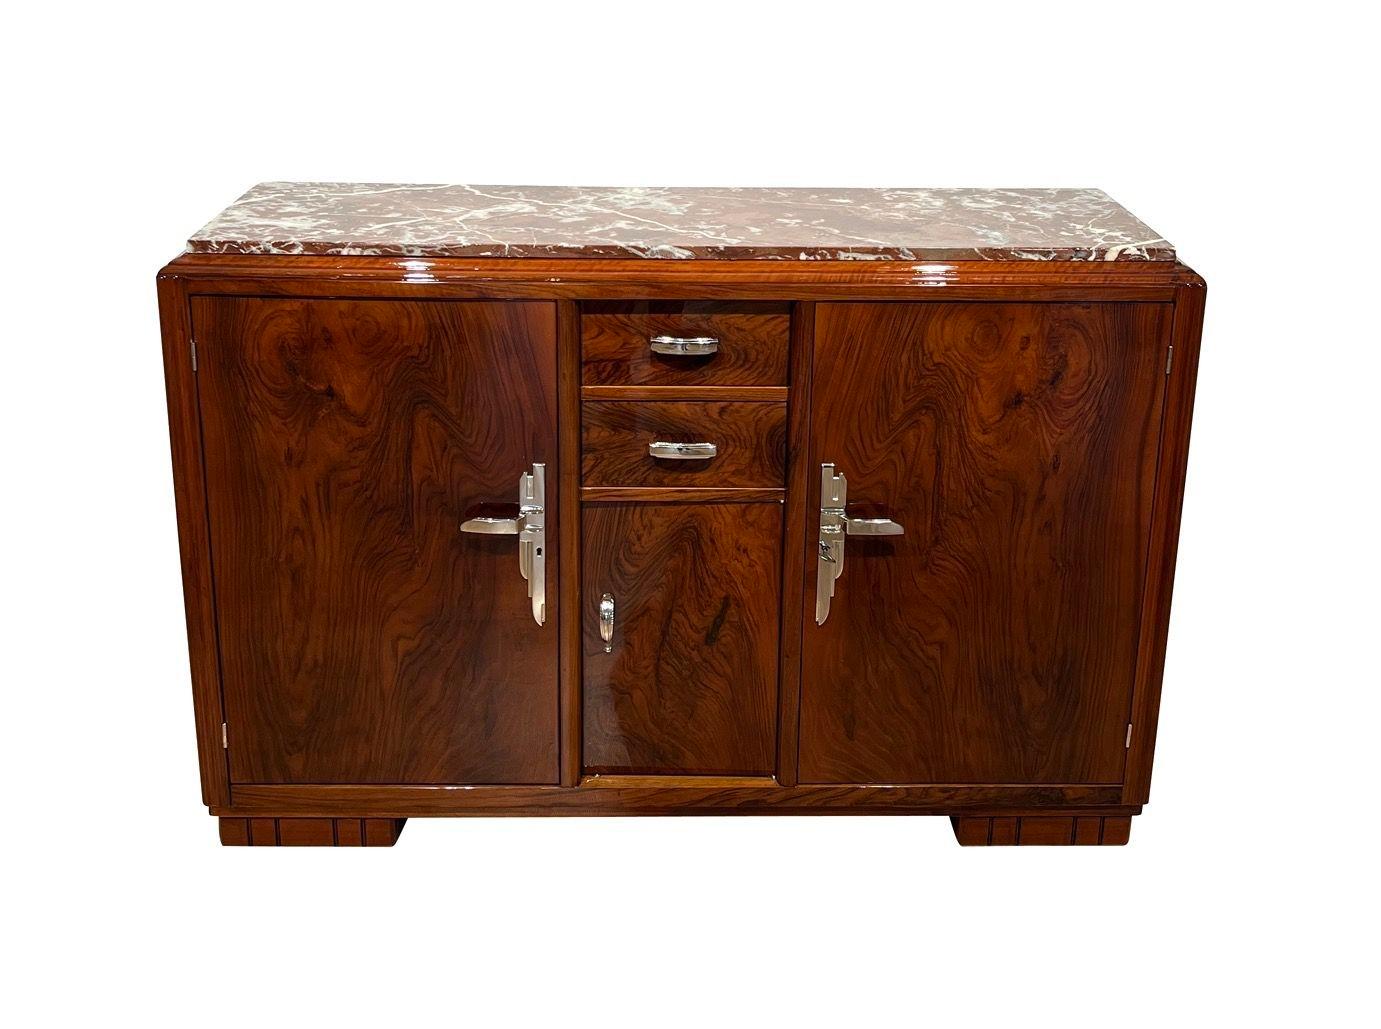 Fully restored original Art Deco Sideboard from France about 1930.
Walnut veneer and solid wood, high-gloss lacquered and polished.
Original bronze fittings, nickel-plated. Original red-white marble top.
Dimensions:
* Metric: H 107 cm x W 160 cm x